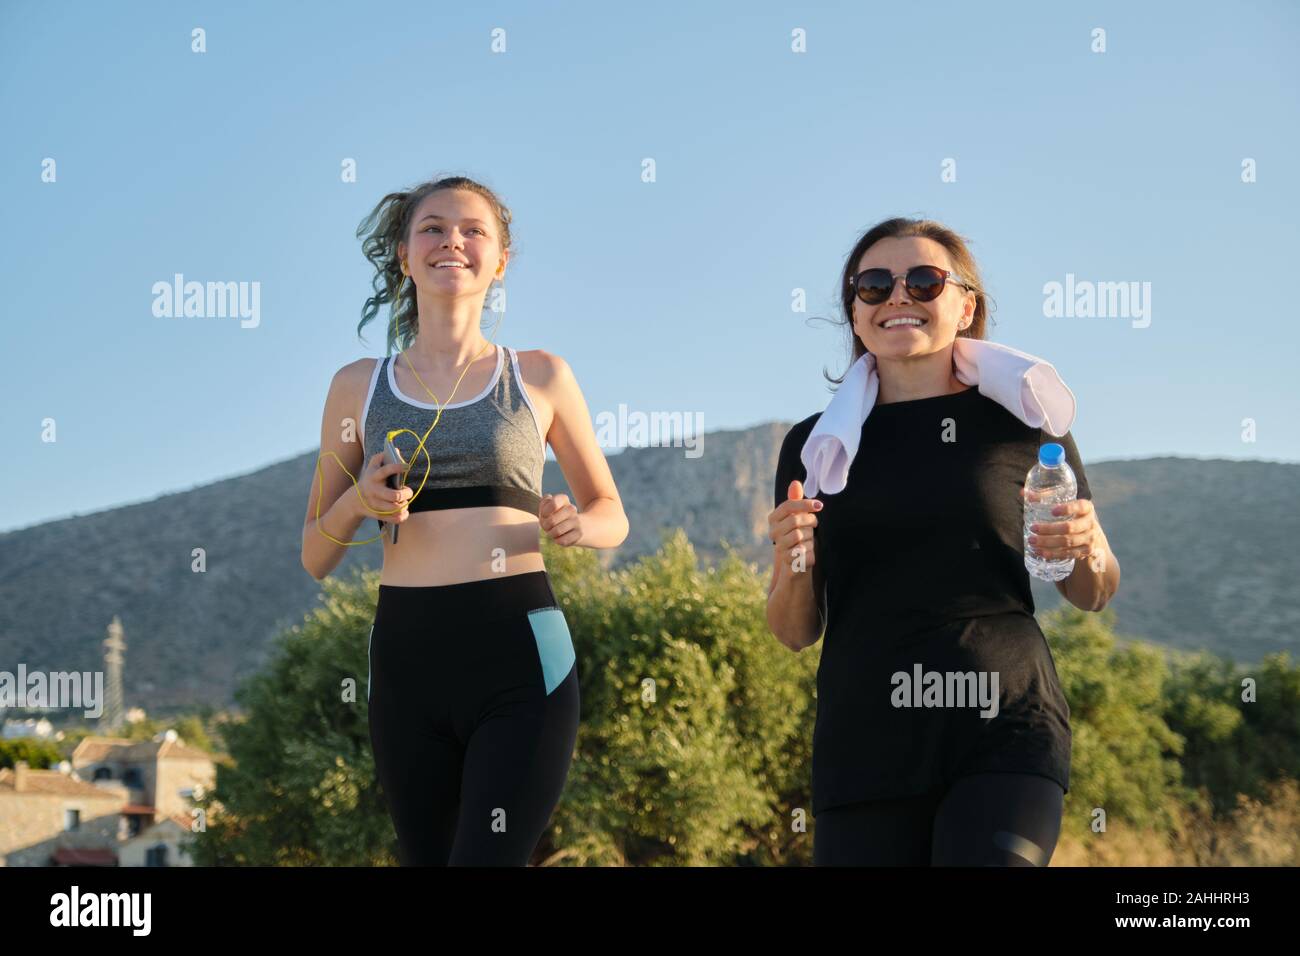 Two running women. Mother and daughter teenager running outdoor on road in mountains on summer sunny day. Family, healthy active sport lifestyle. Stock Photo